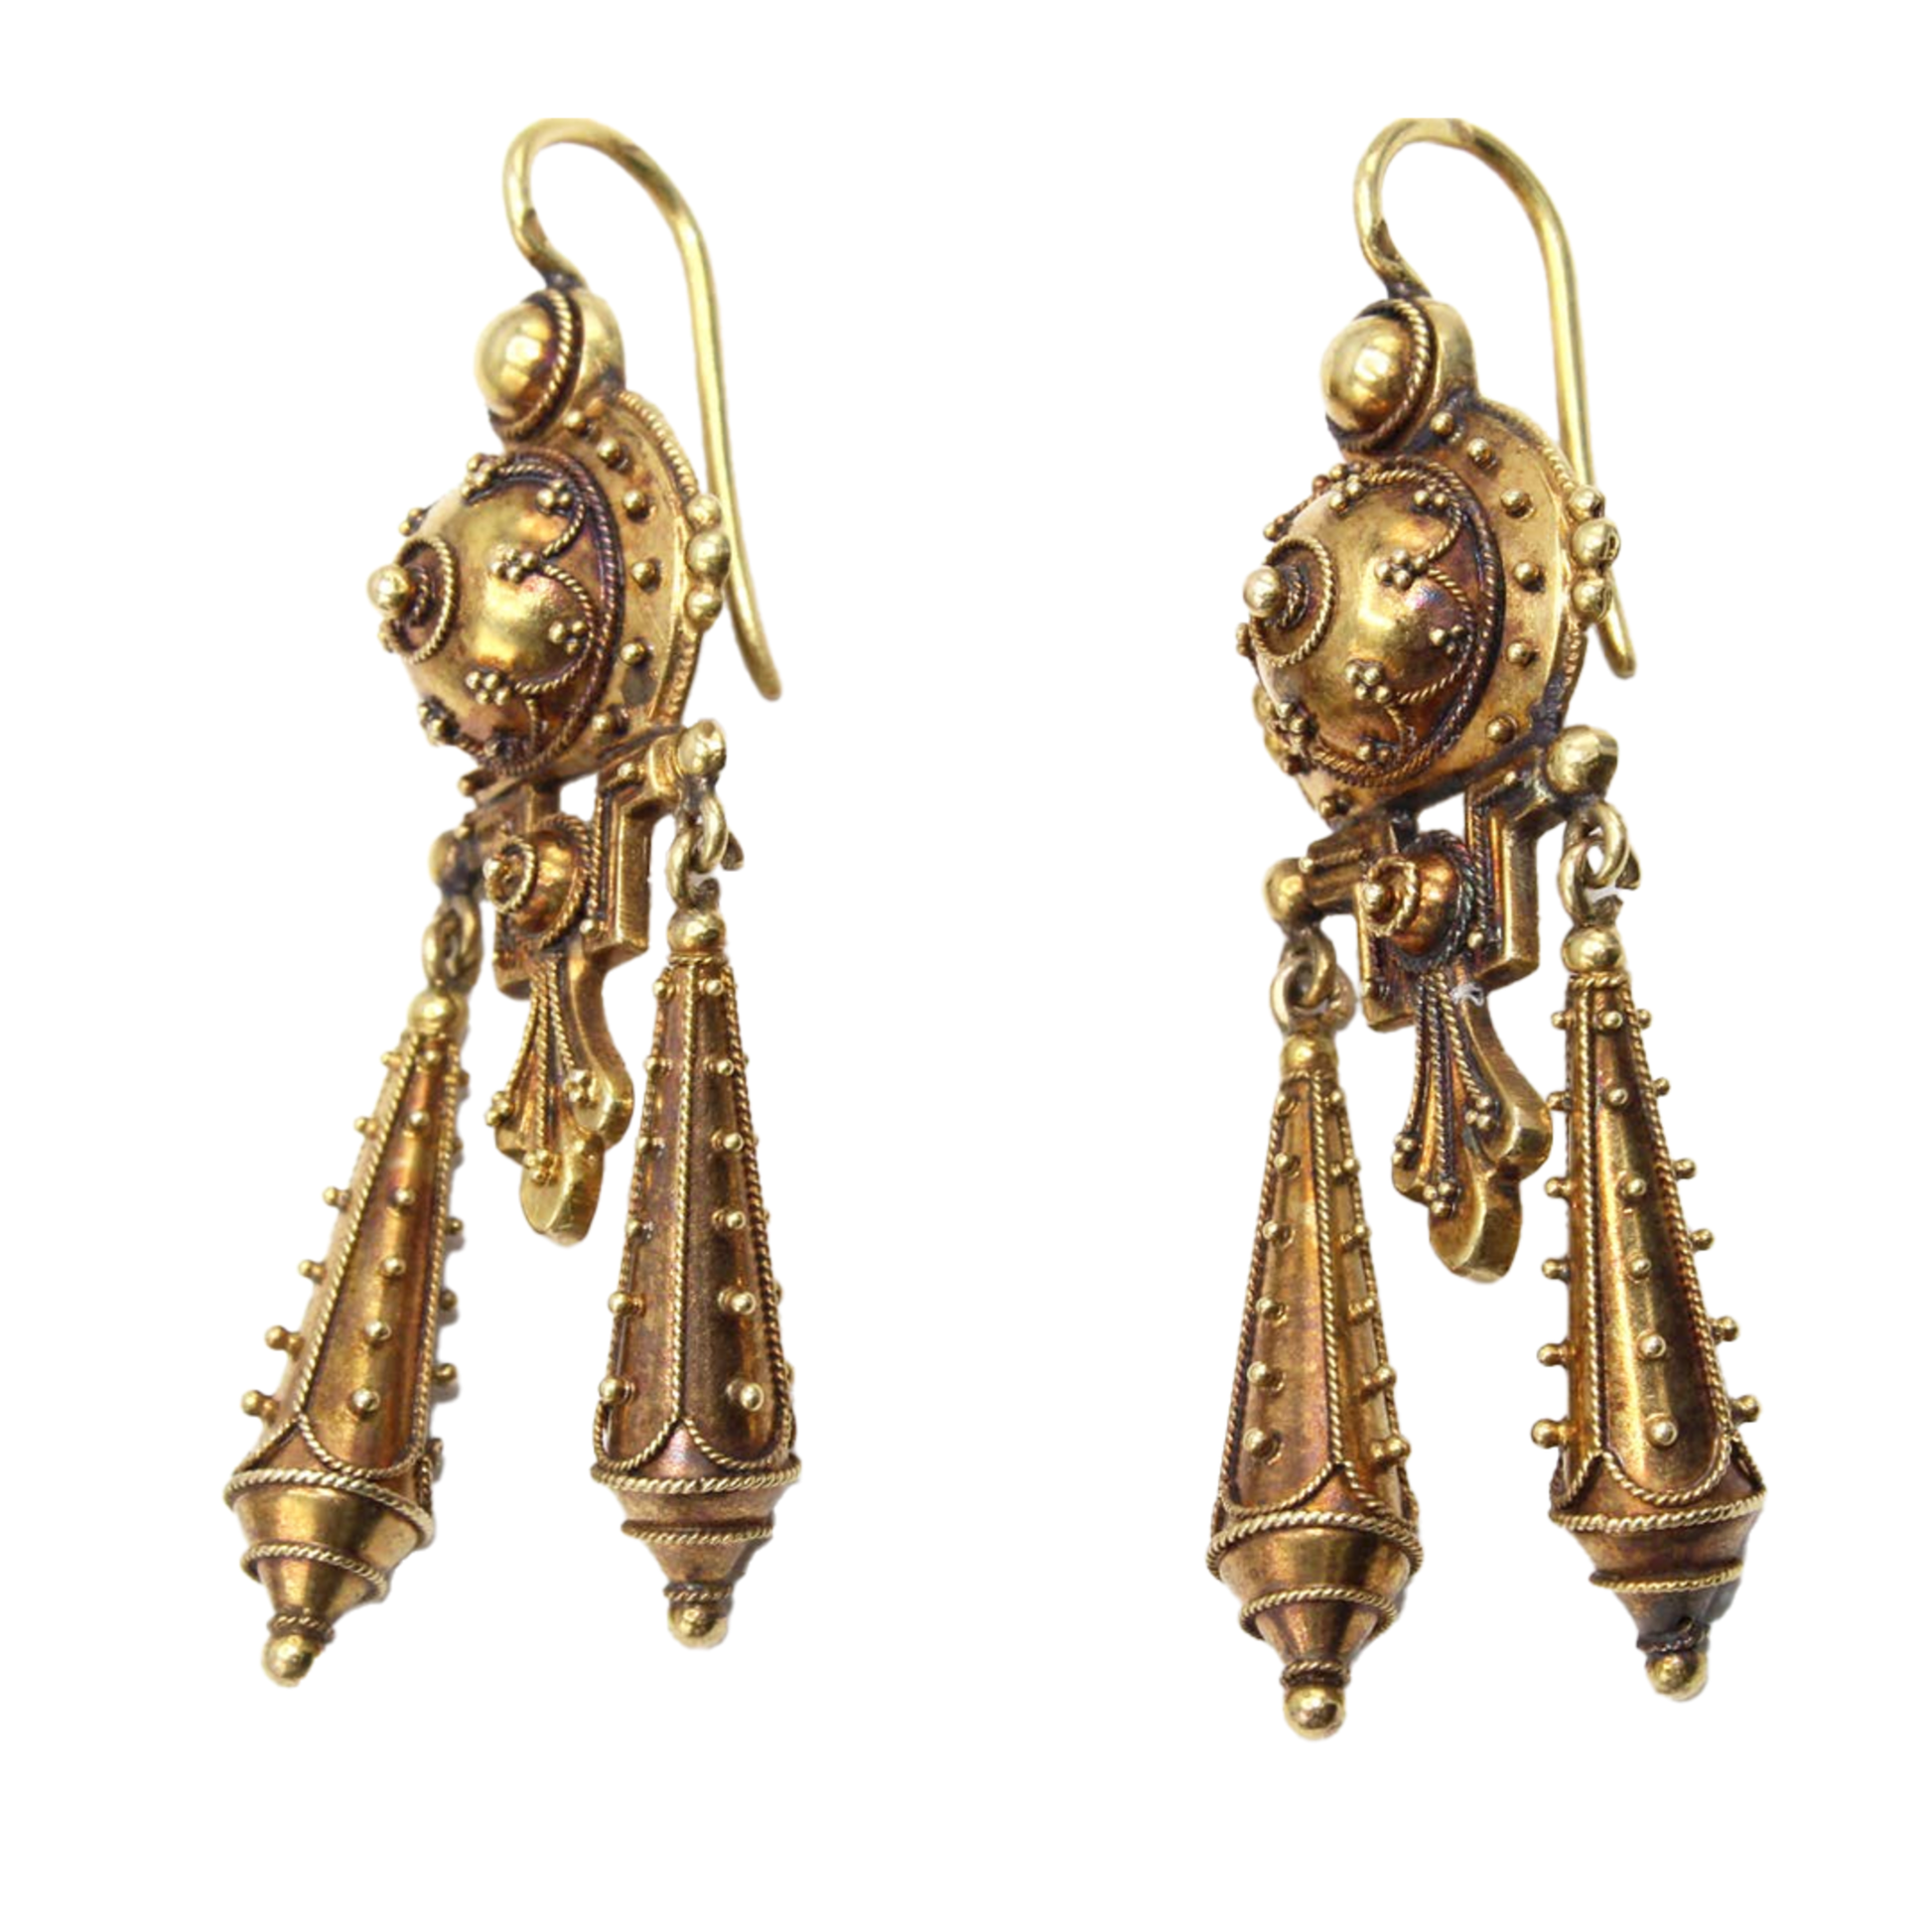 French Victorian Etruscan Revival 18KT Yellow Gold Earrings front and side